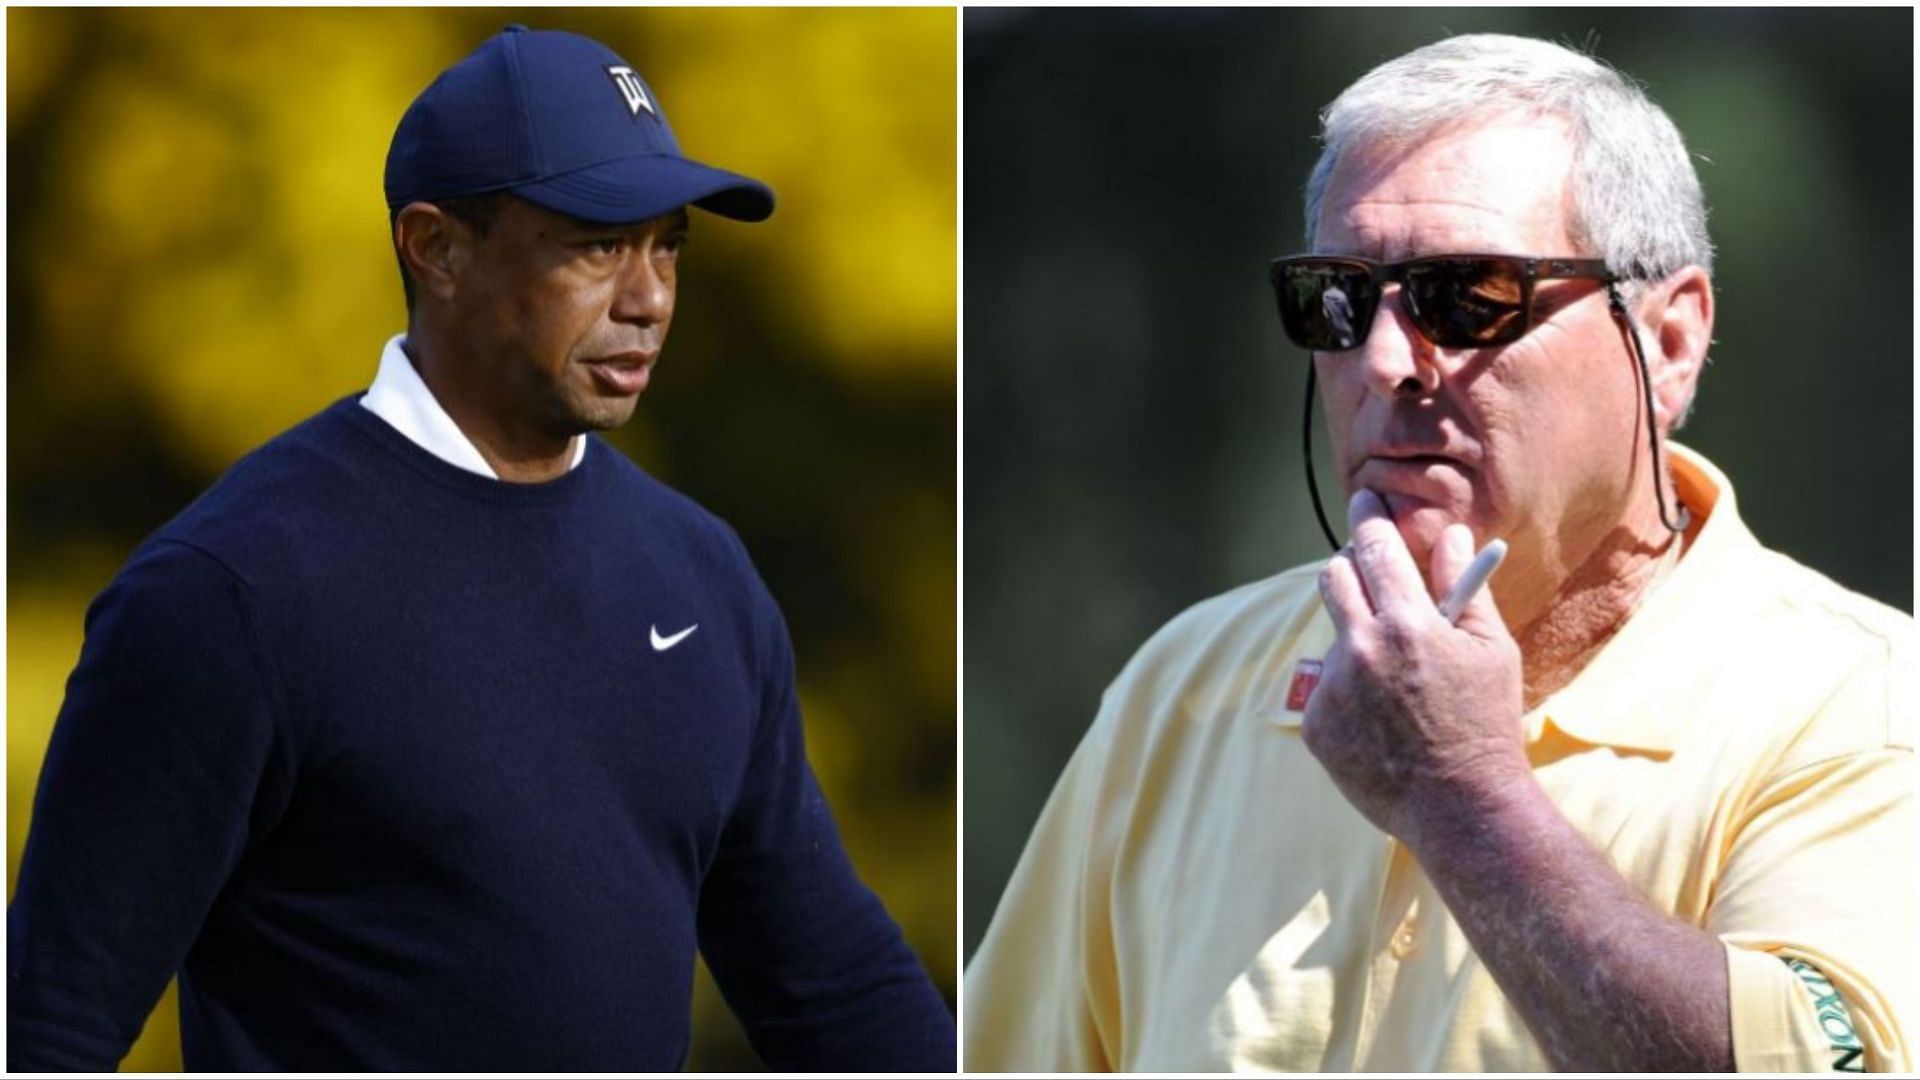 Tiger Woods and Fuzzy Zoeller (via Getty Images)